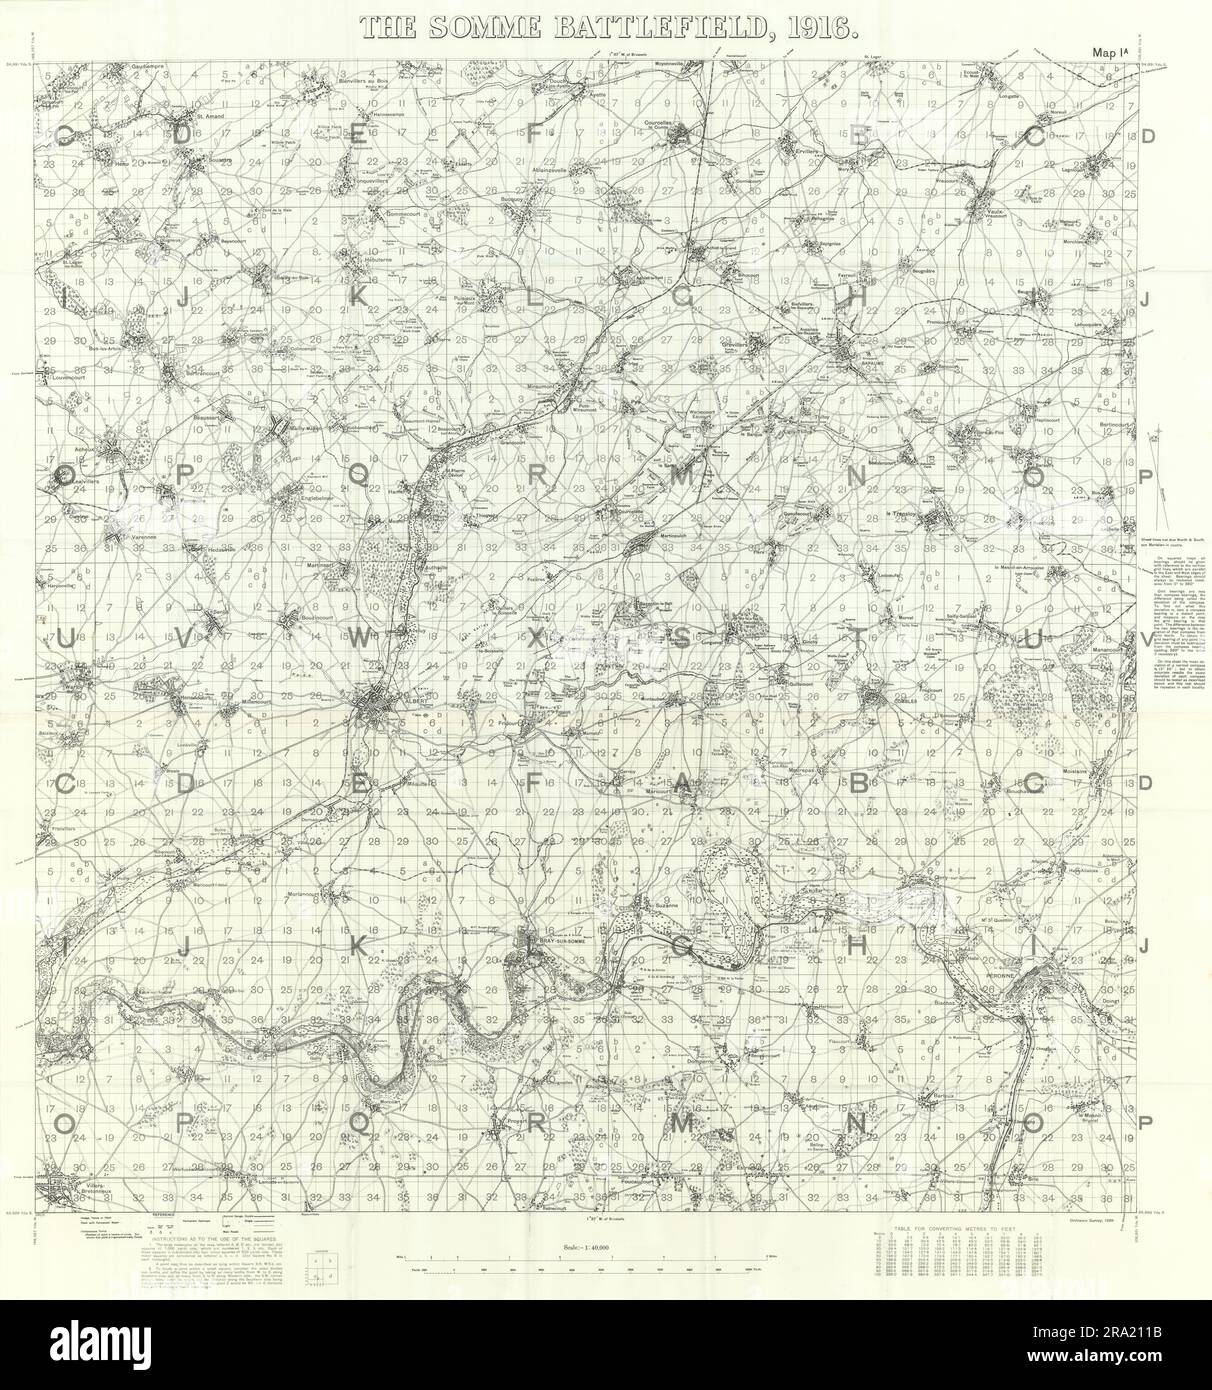 The Somme Battlefield, 1916. Battle of the Somme. First World War. 1932 map Stock Photo